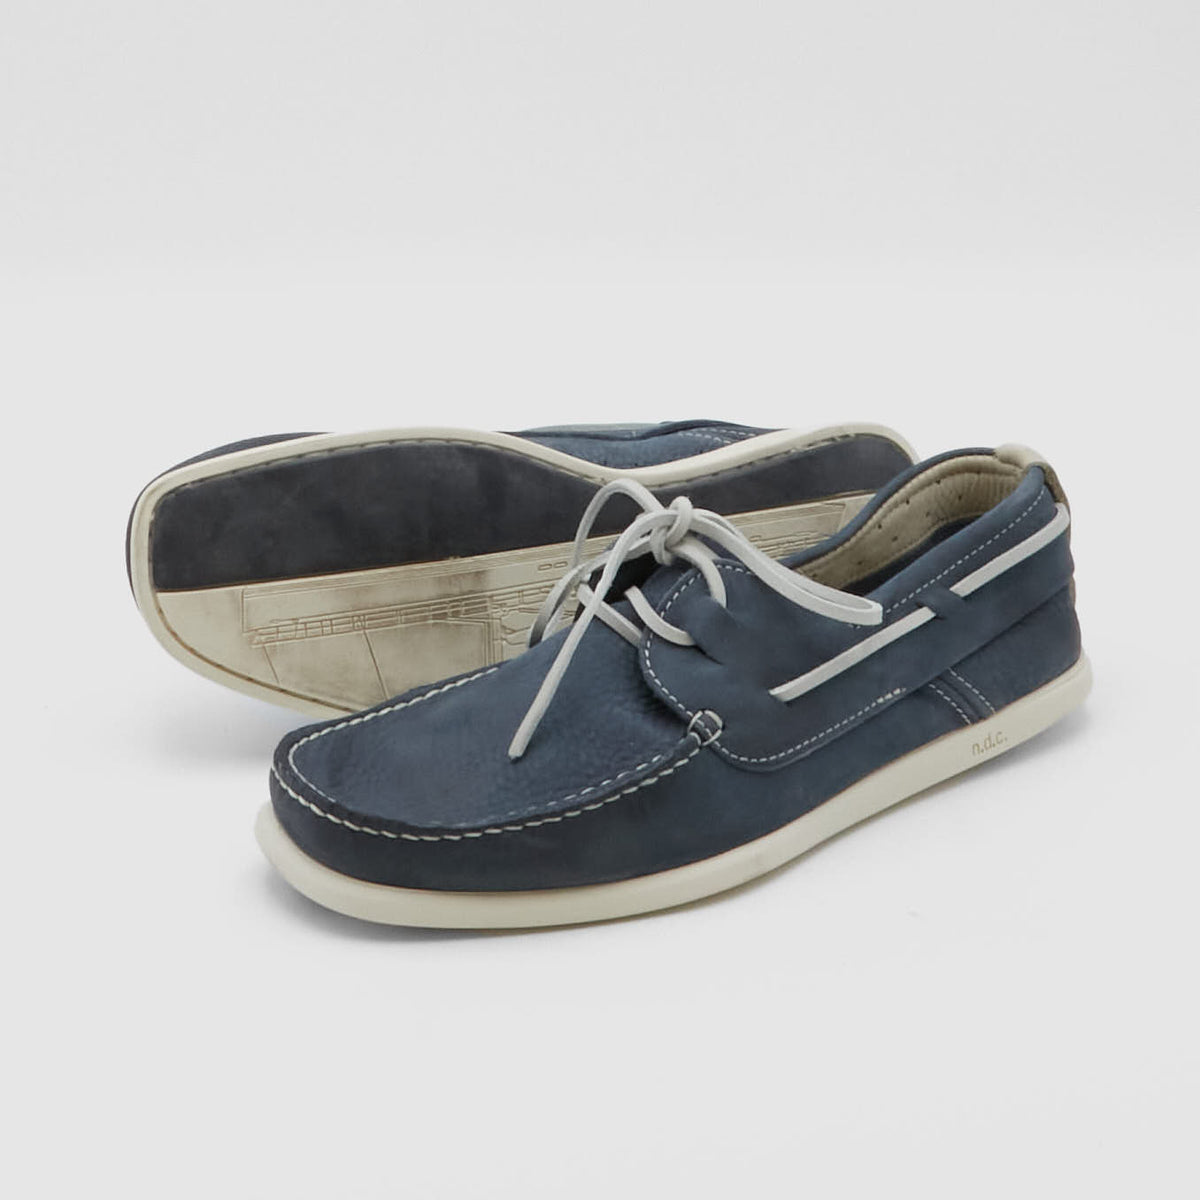 n.d.c made by hand Alithia Vintage Wash Boat Shoes